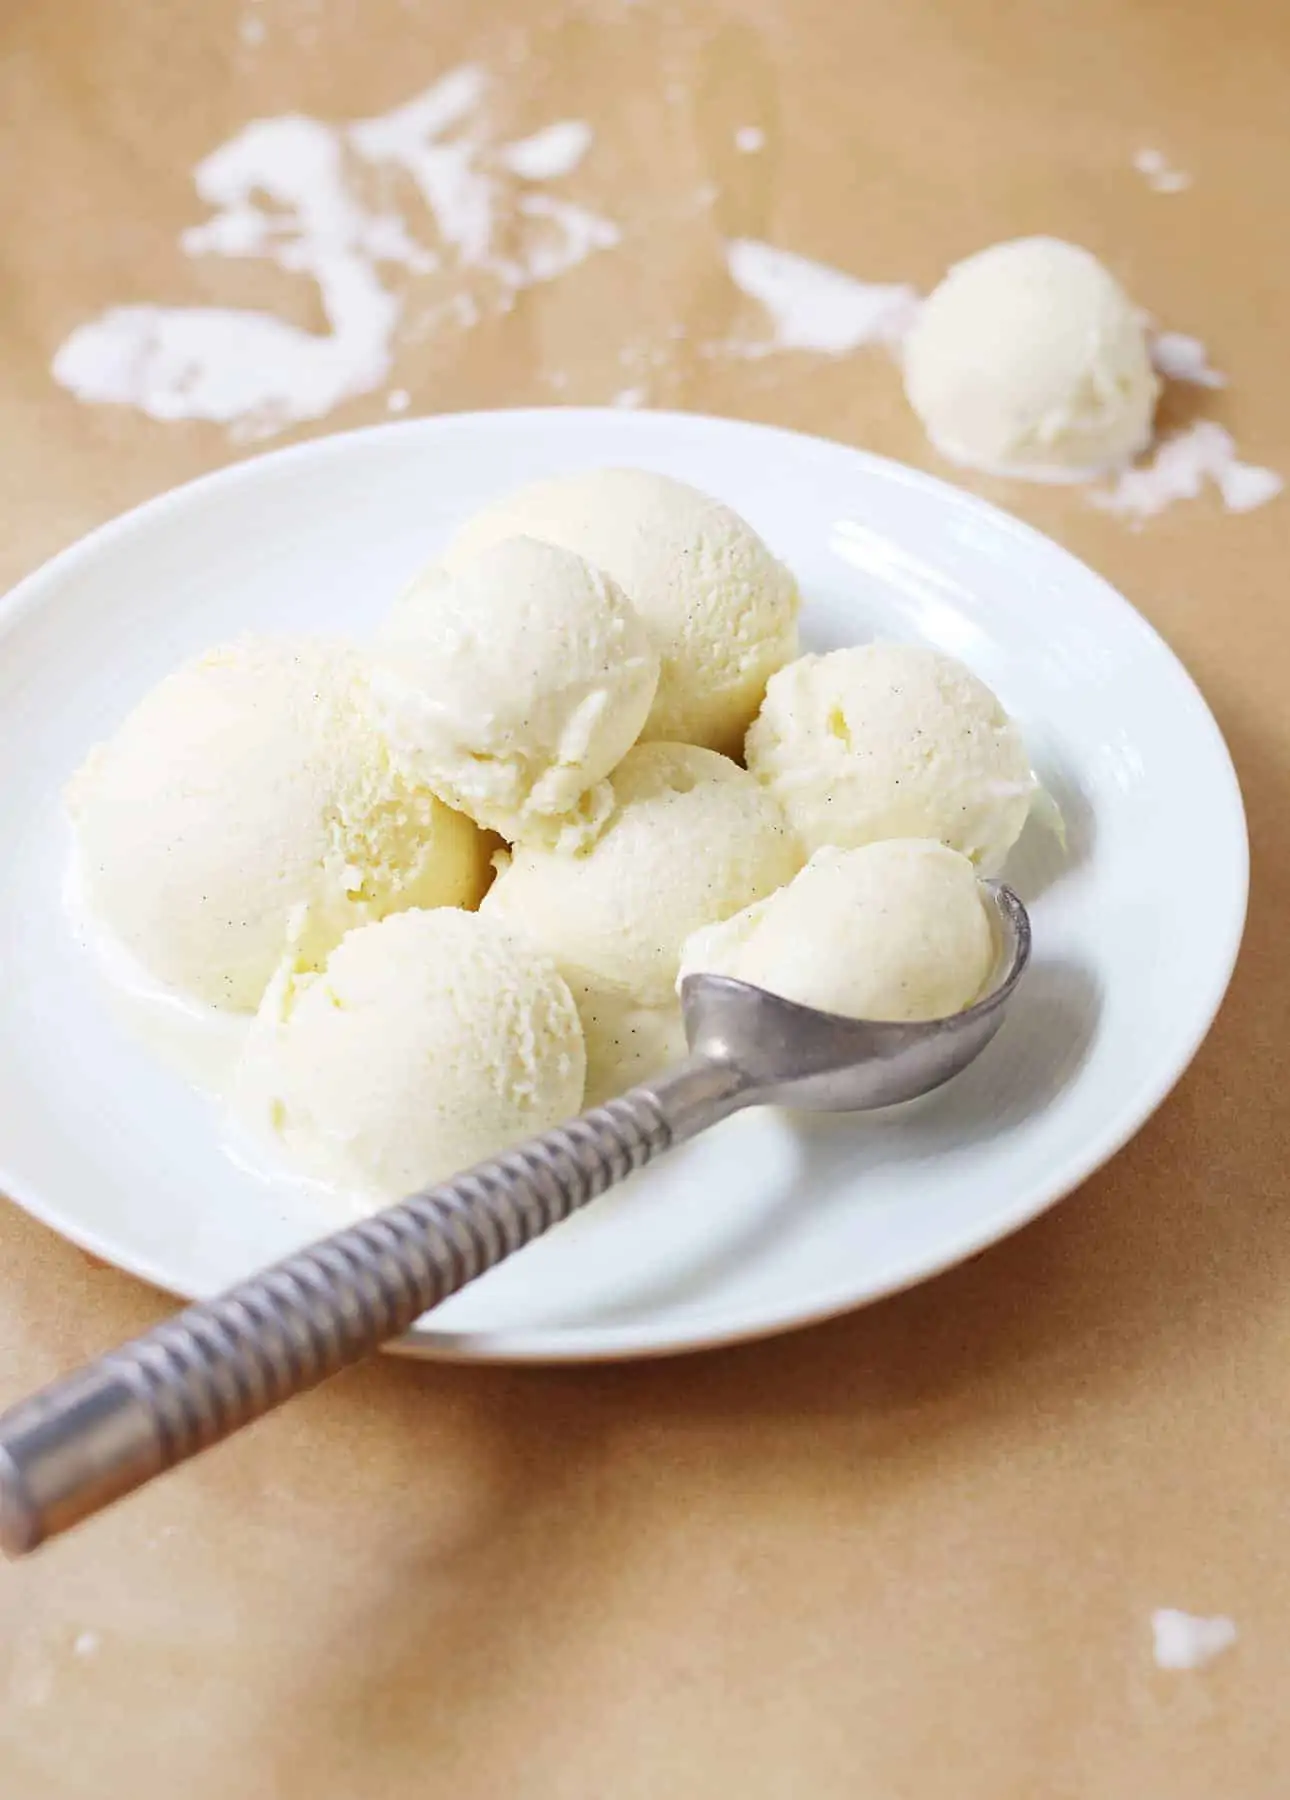 Learn How to Make Gelato at Home (Dairy-Free, Vegan Options) // FoodNouveau.com